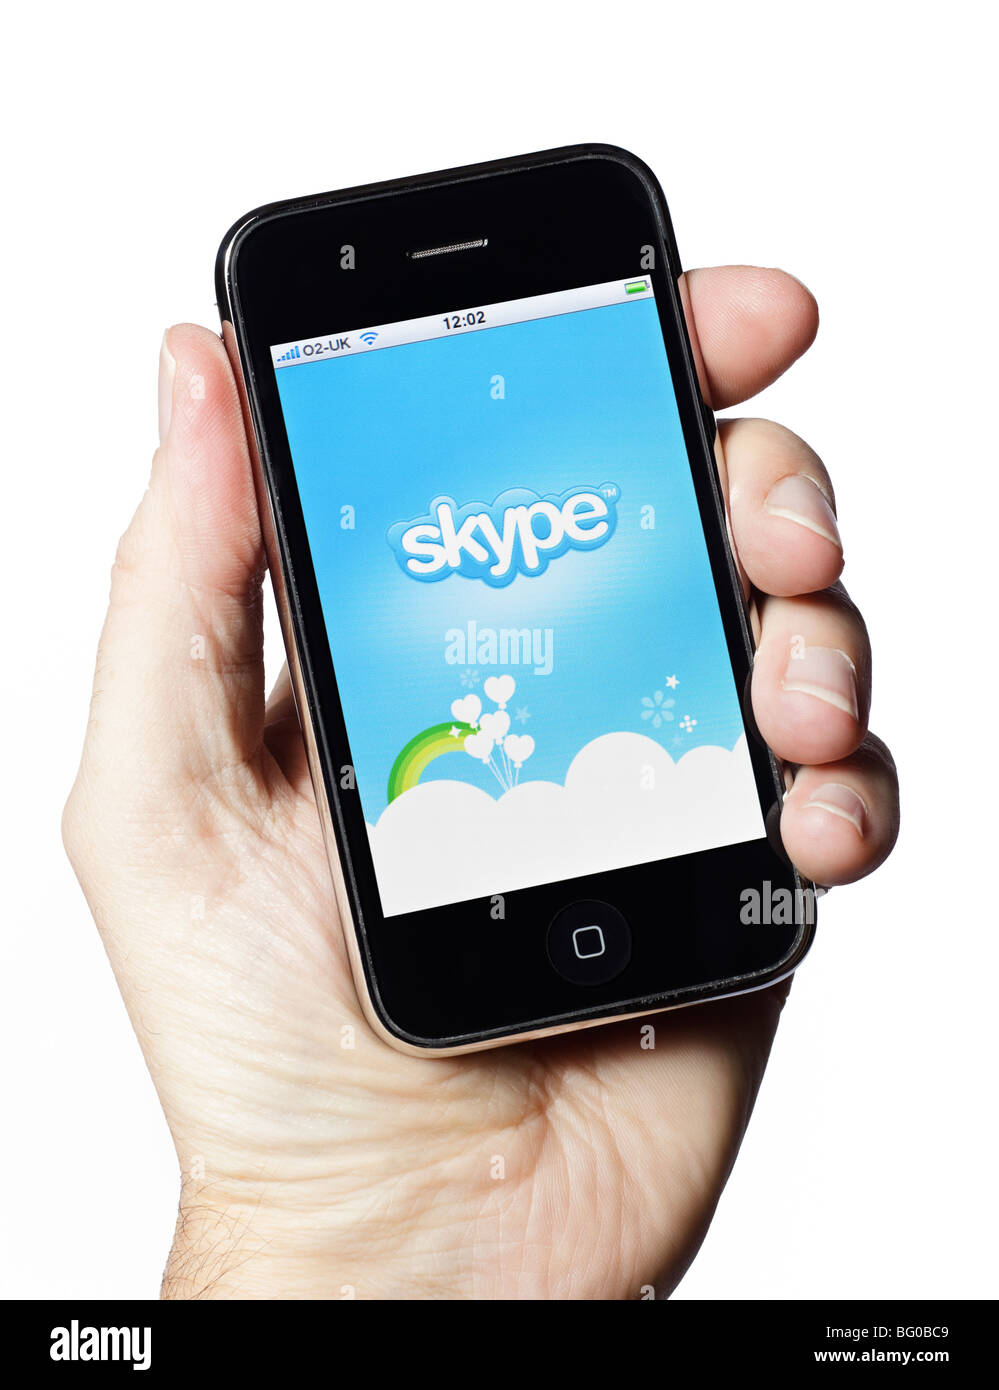 Male hand holding iPhone showing mobile phone smartphone Skype application smart phone Stock Photo